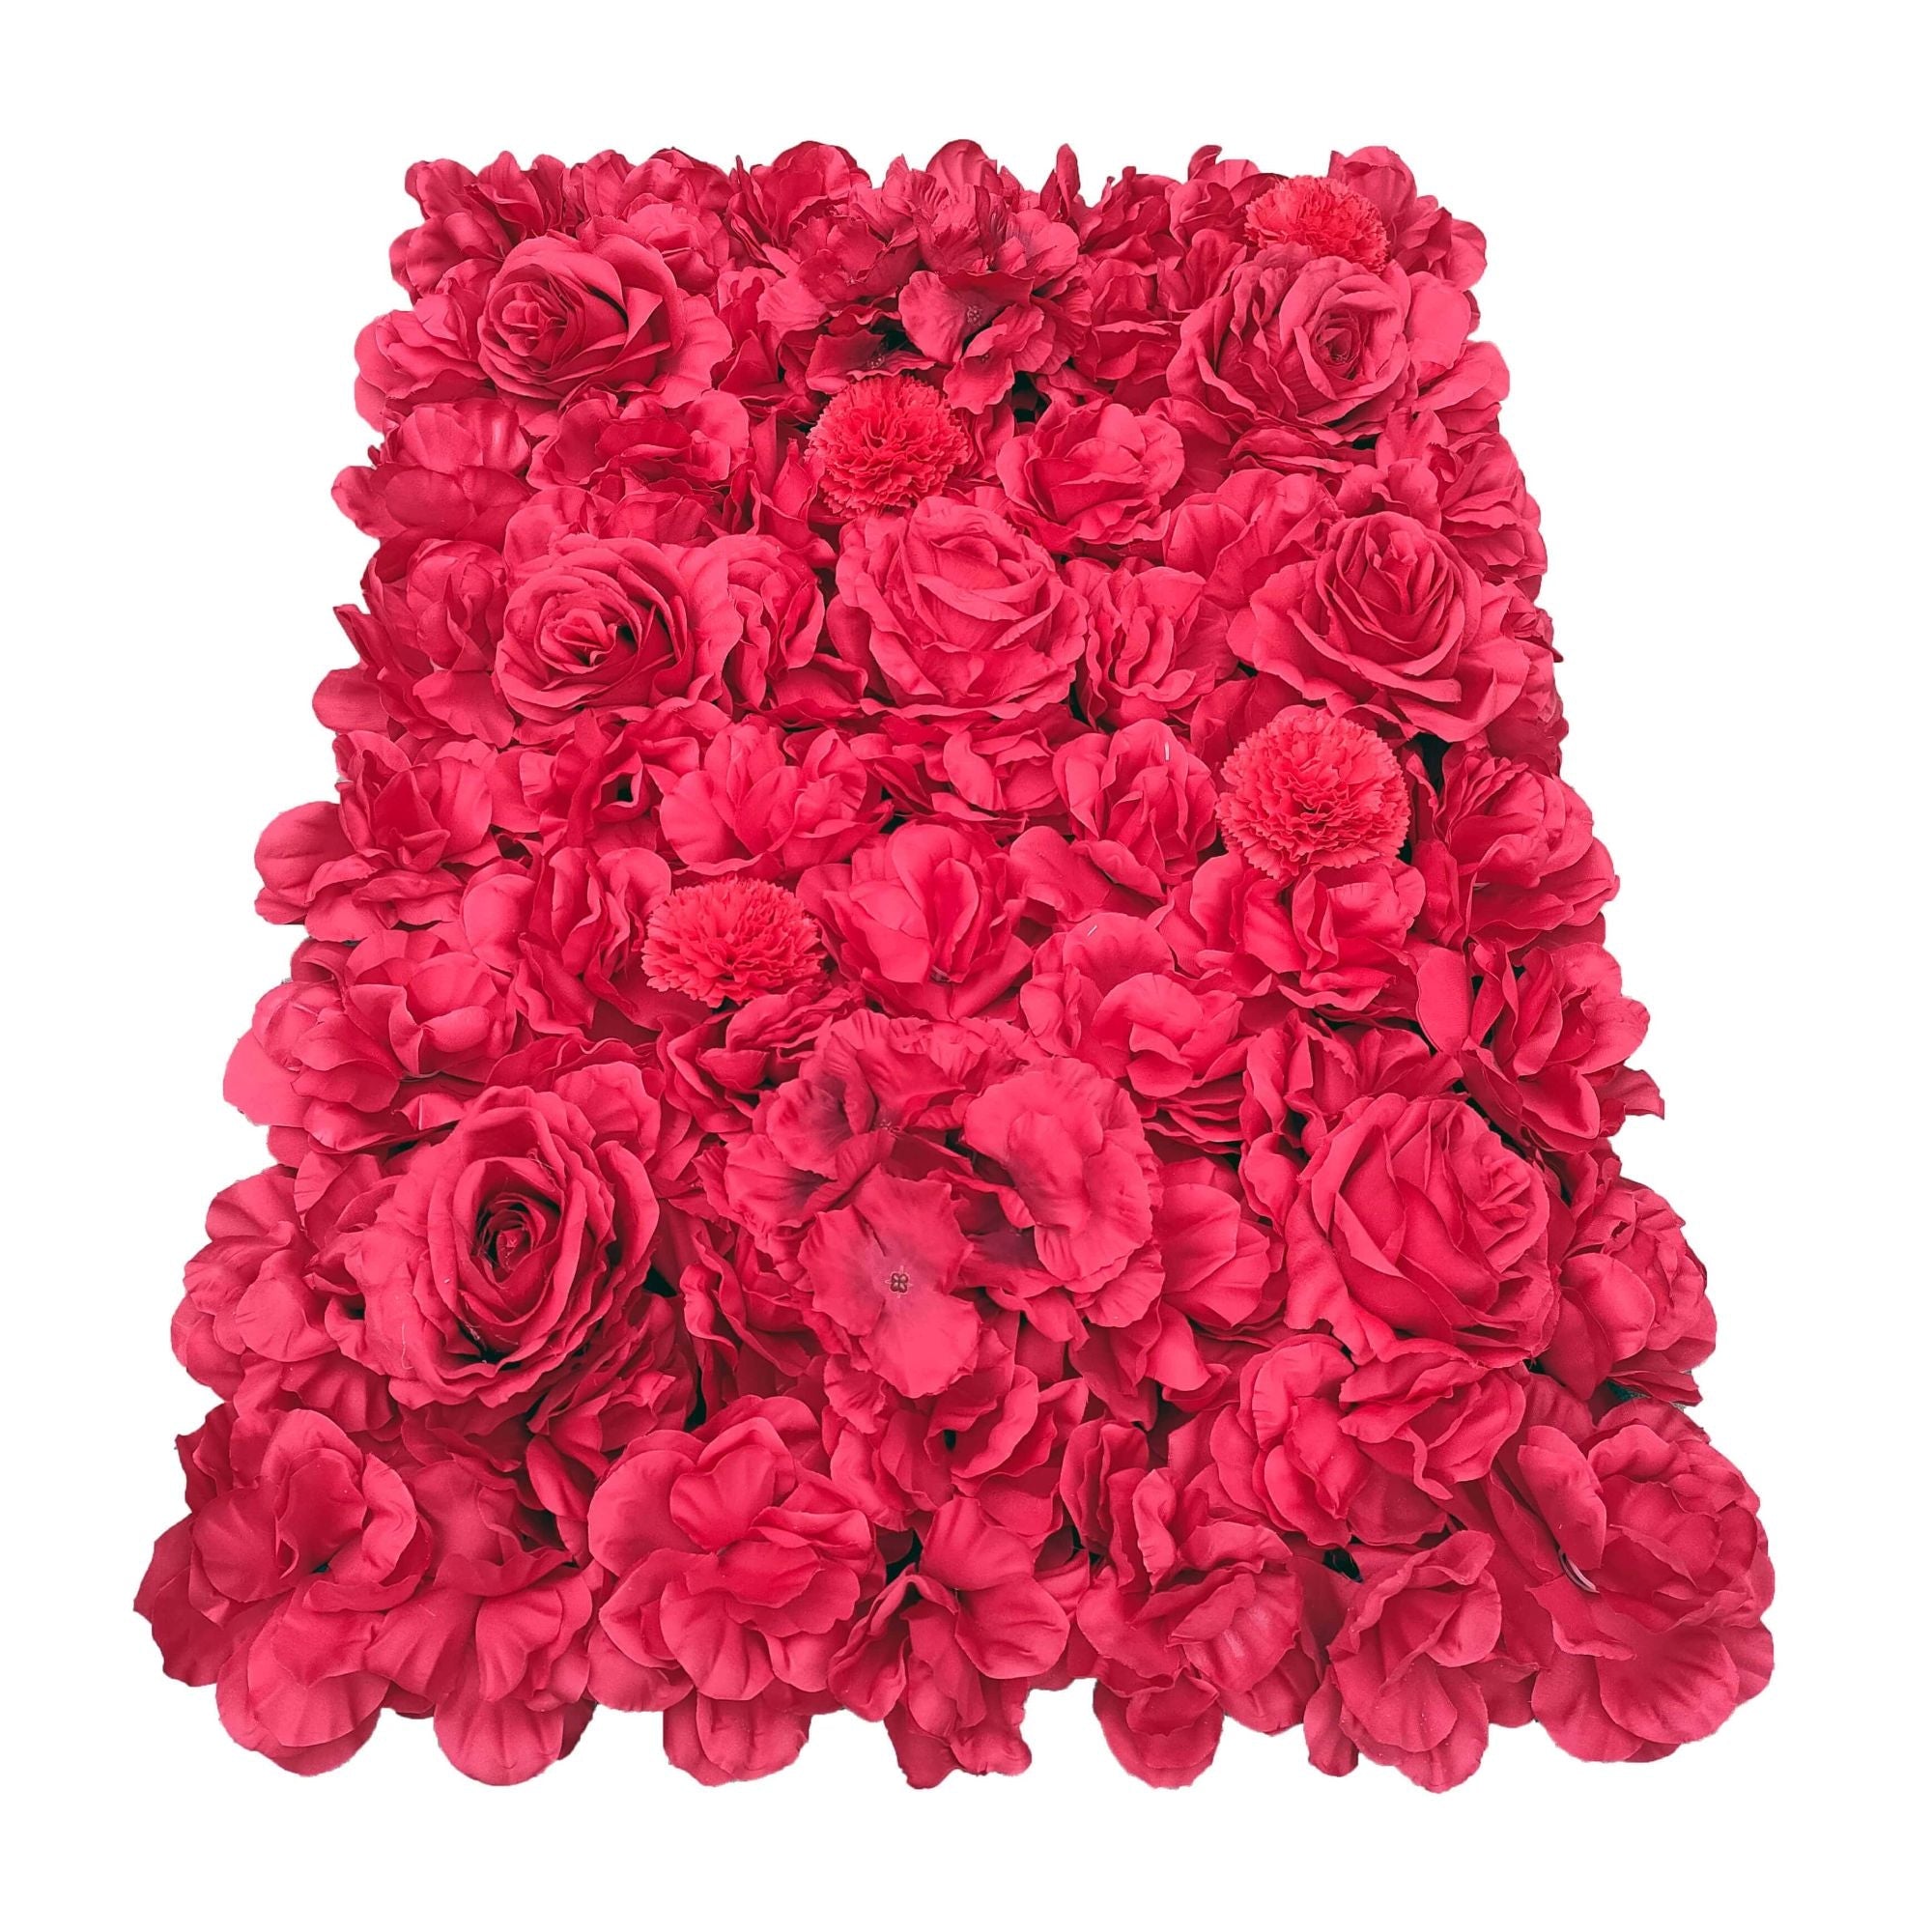 Artificial Flower Wall Backdrop Panel 40cm X 60cm Romantic Red - Designer Vertical Gardens artificial green walls with flowers Flowering plants